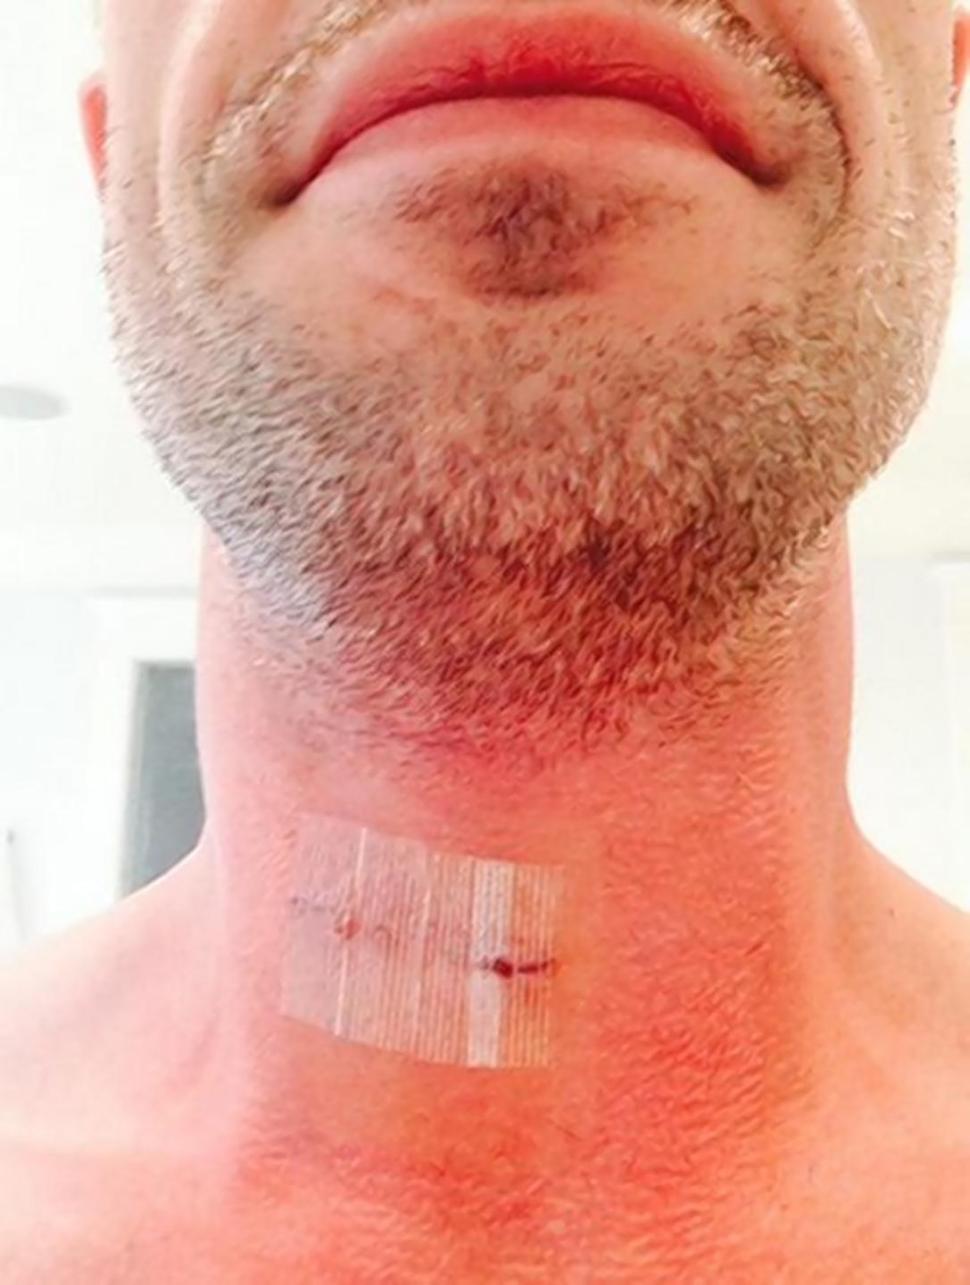 The ‘She’s All That’ did not reveal why he got his spinal surgery.